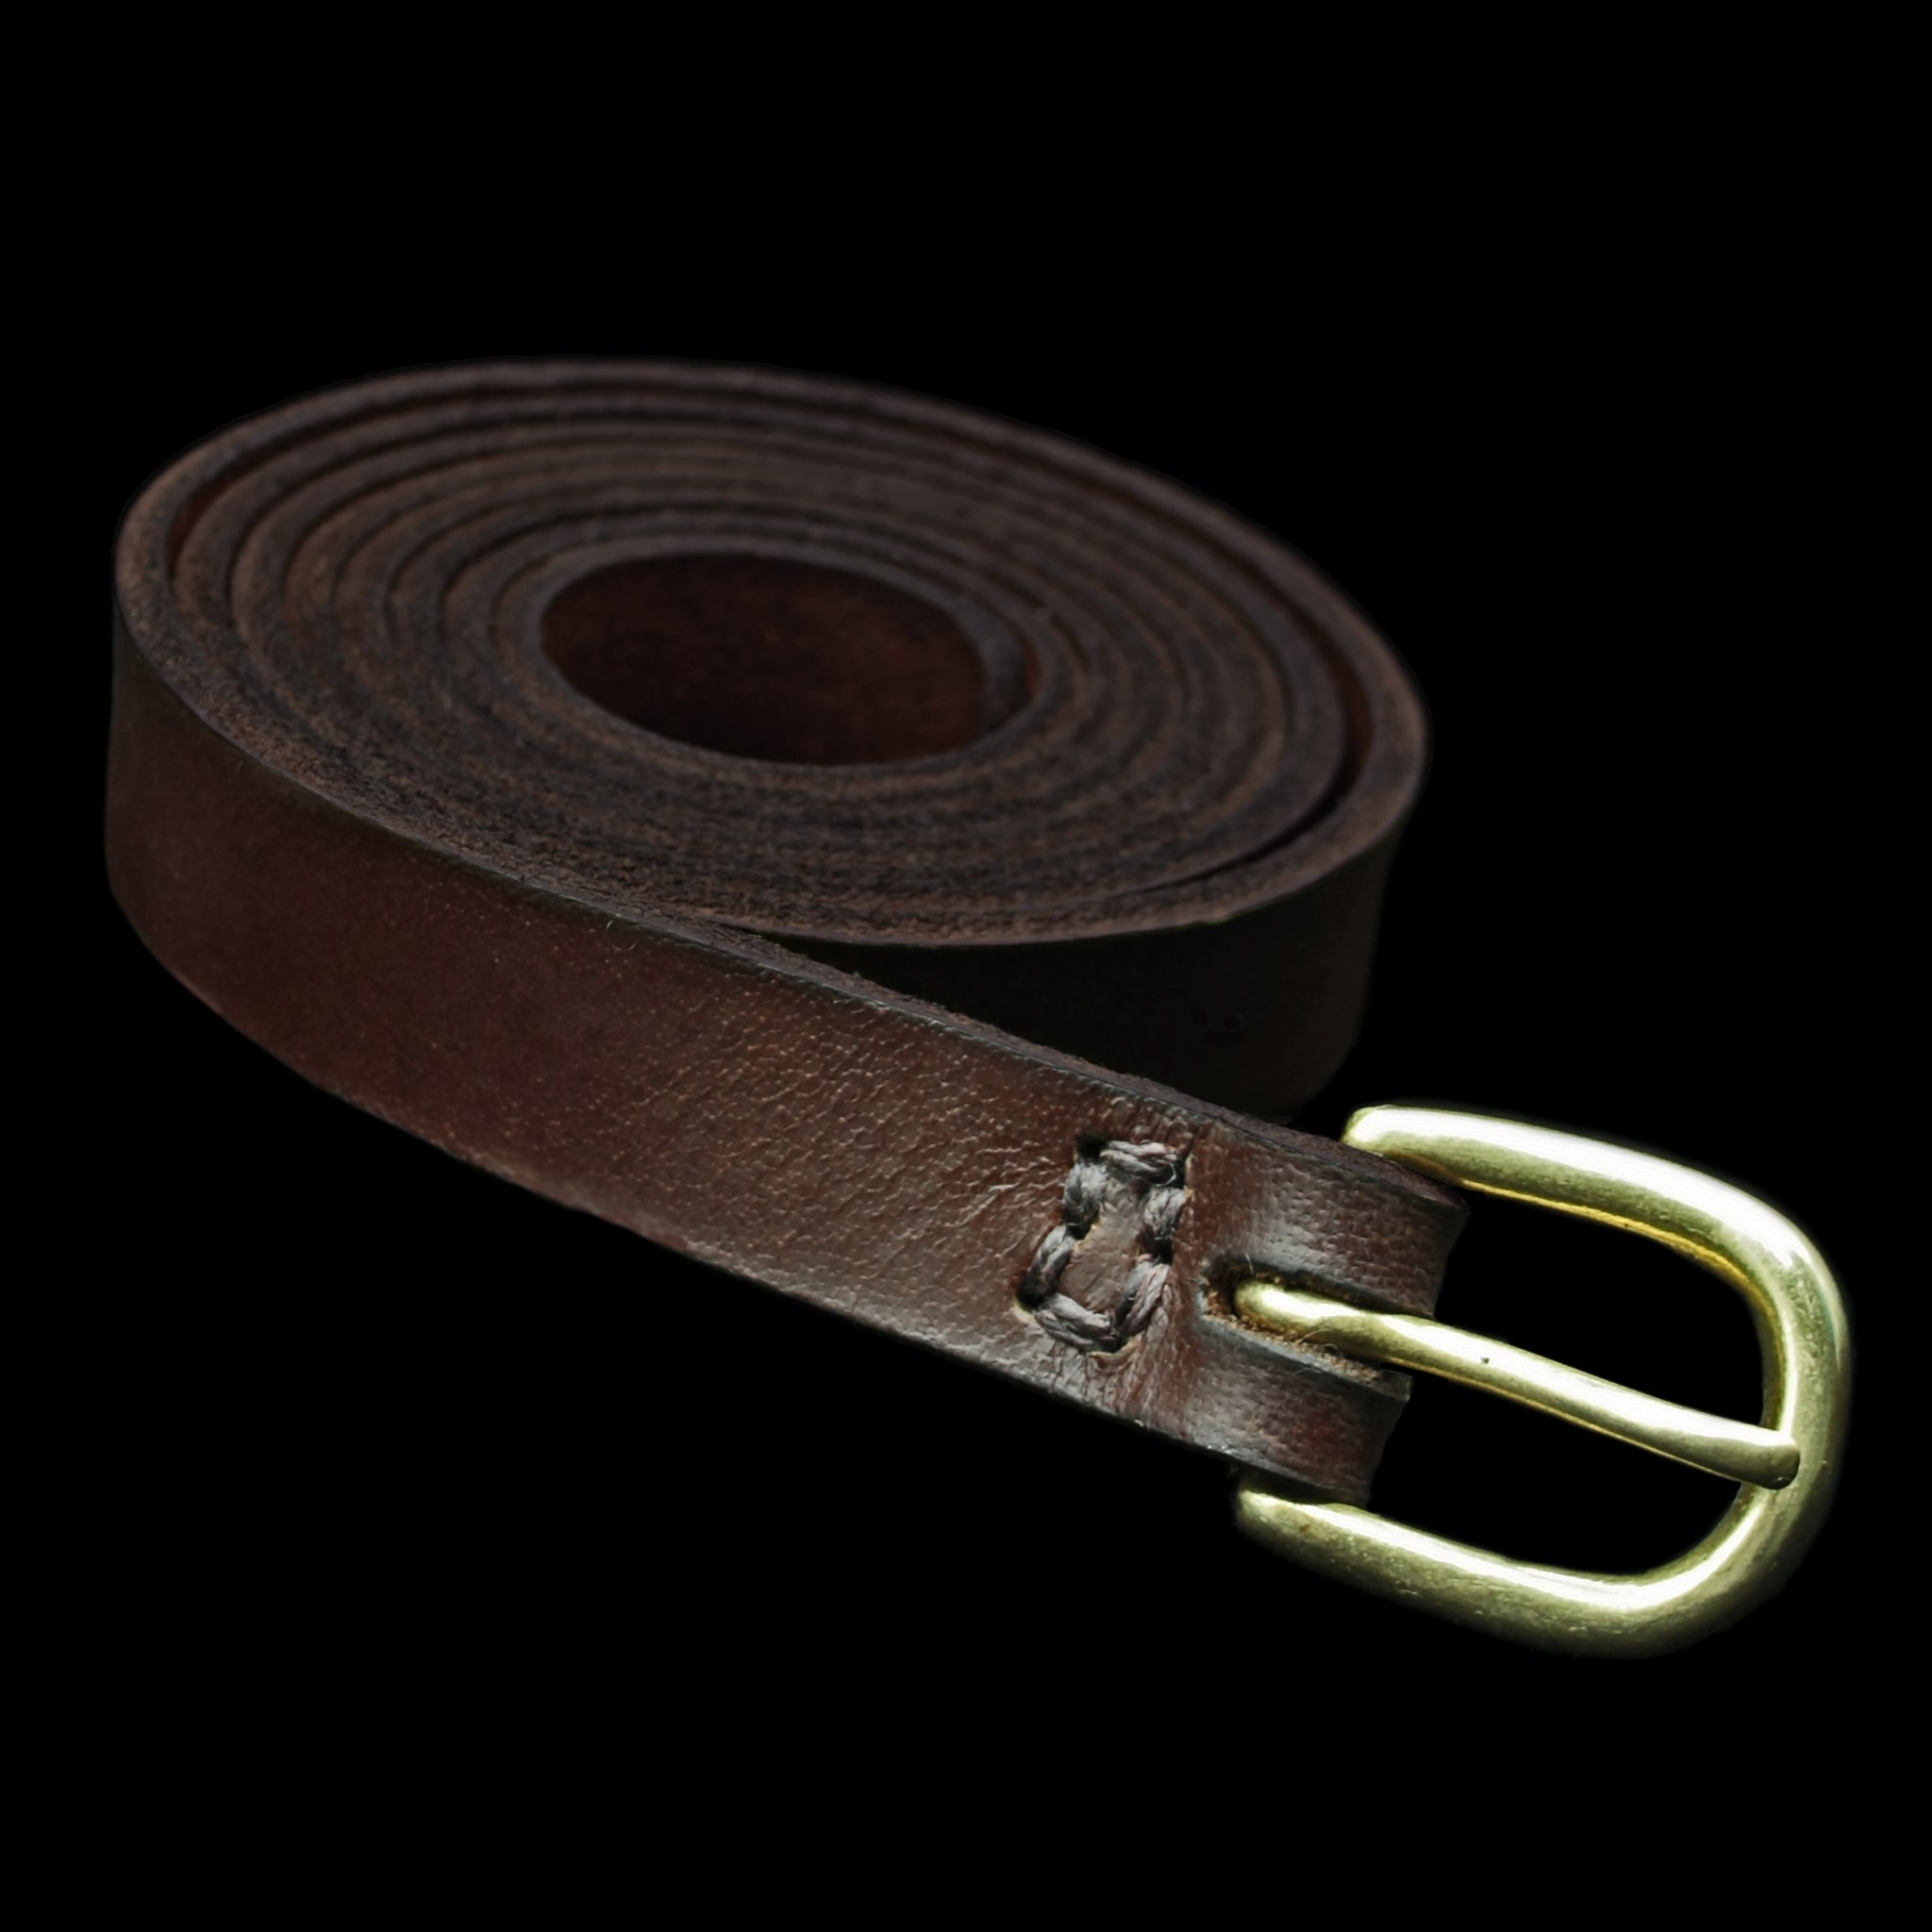 Handmade 19mm Brown Leather Viking Belt with Brass Buckle